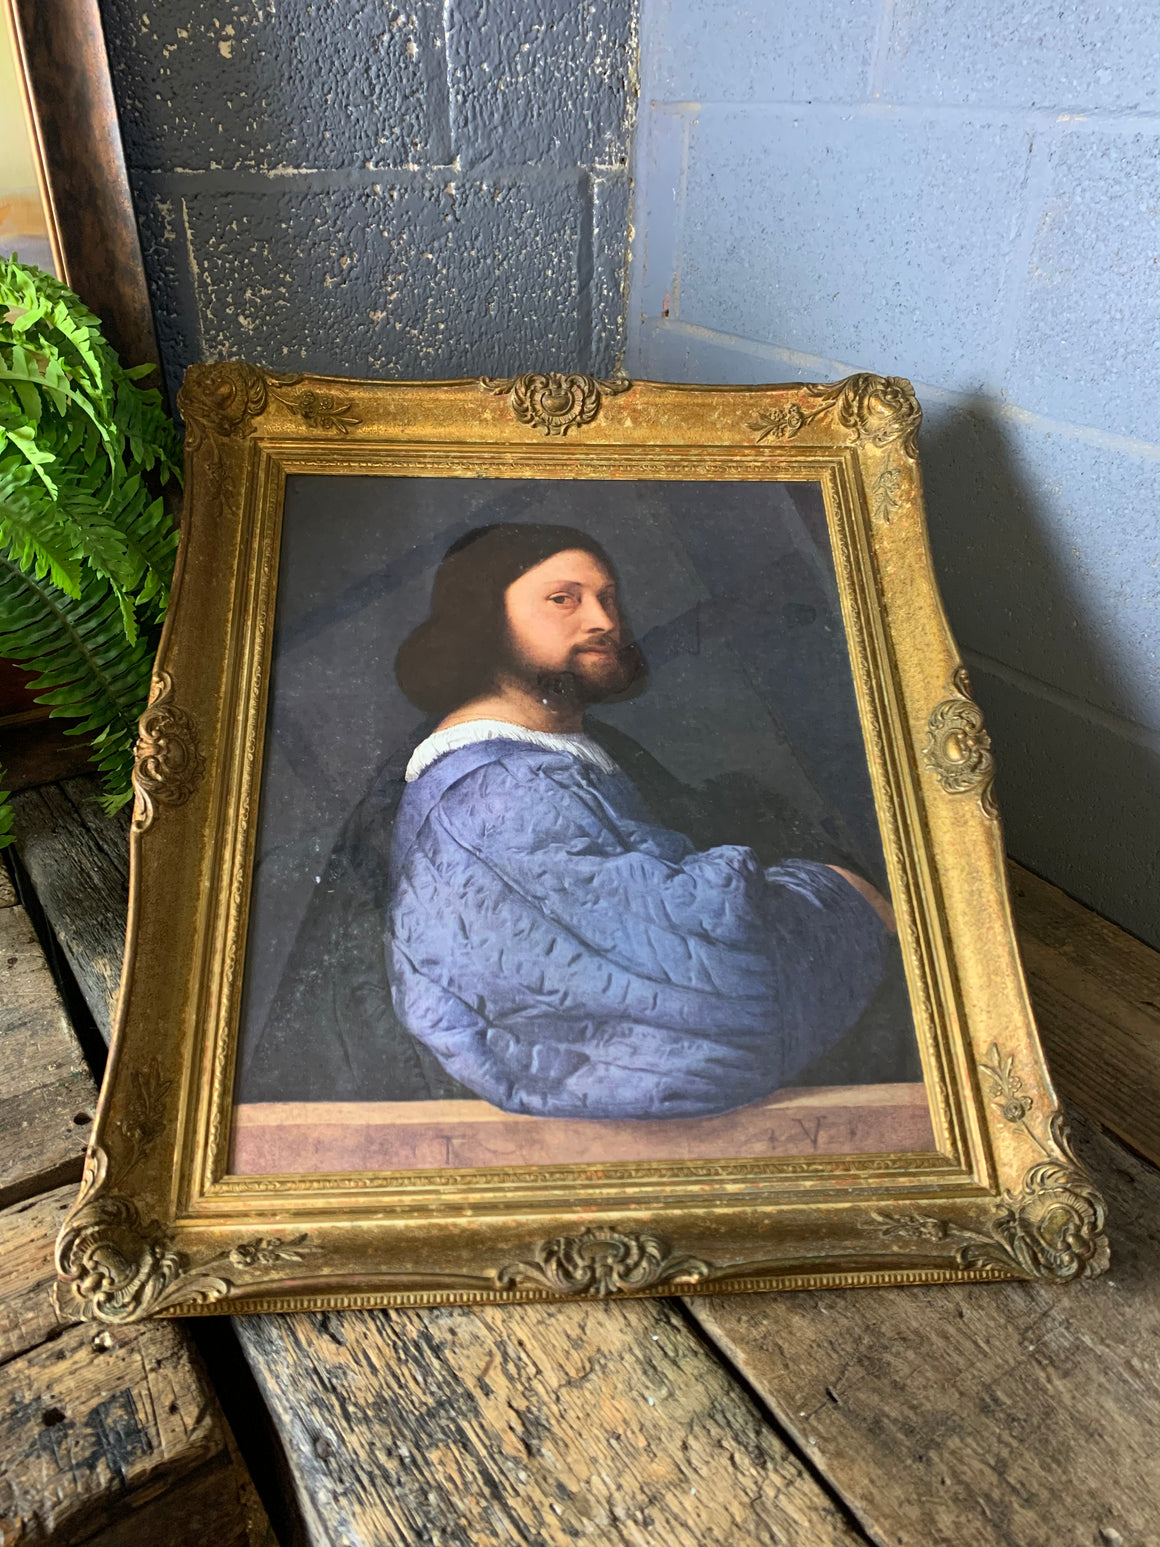 A large framed print of Titian's "Portrait of a Man"